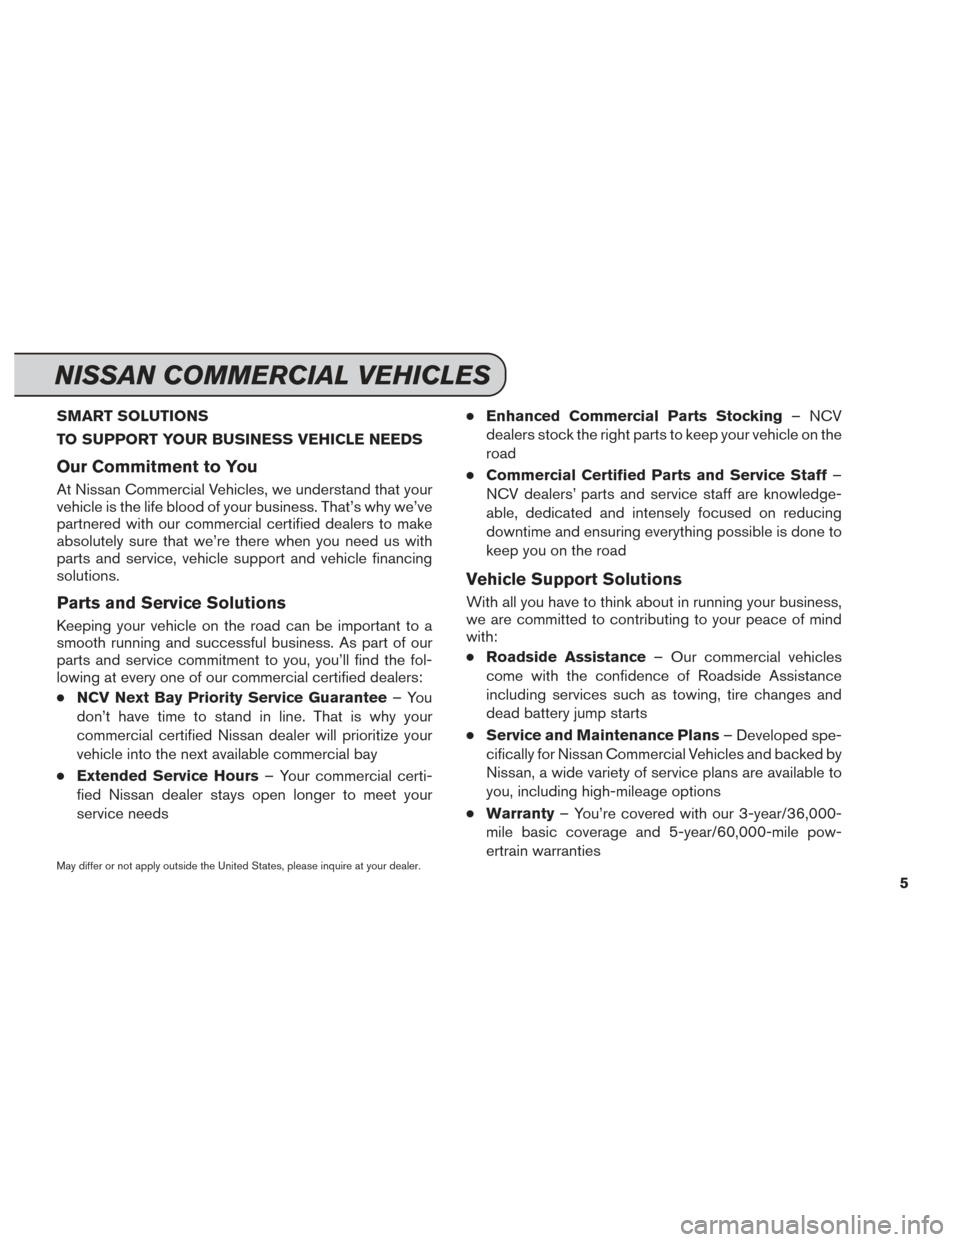 NISSAN SENTRA 2014 B17 / 7.G Service And Maintenance Guide SMART SOLUTIONS
TO SUPPORT YOUR BUSINESS VEHICLE NEEDS
Our Commitment to You
At Nissan Commercial Vehicles, we understand that your
vehicle is the life blood of your business. That’s why we’ve
par